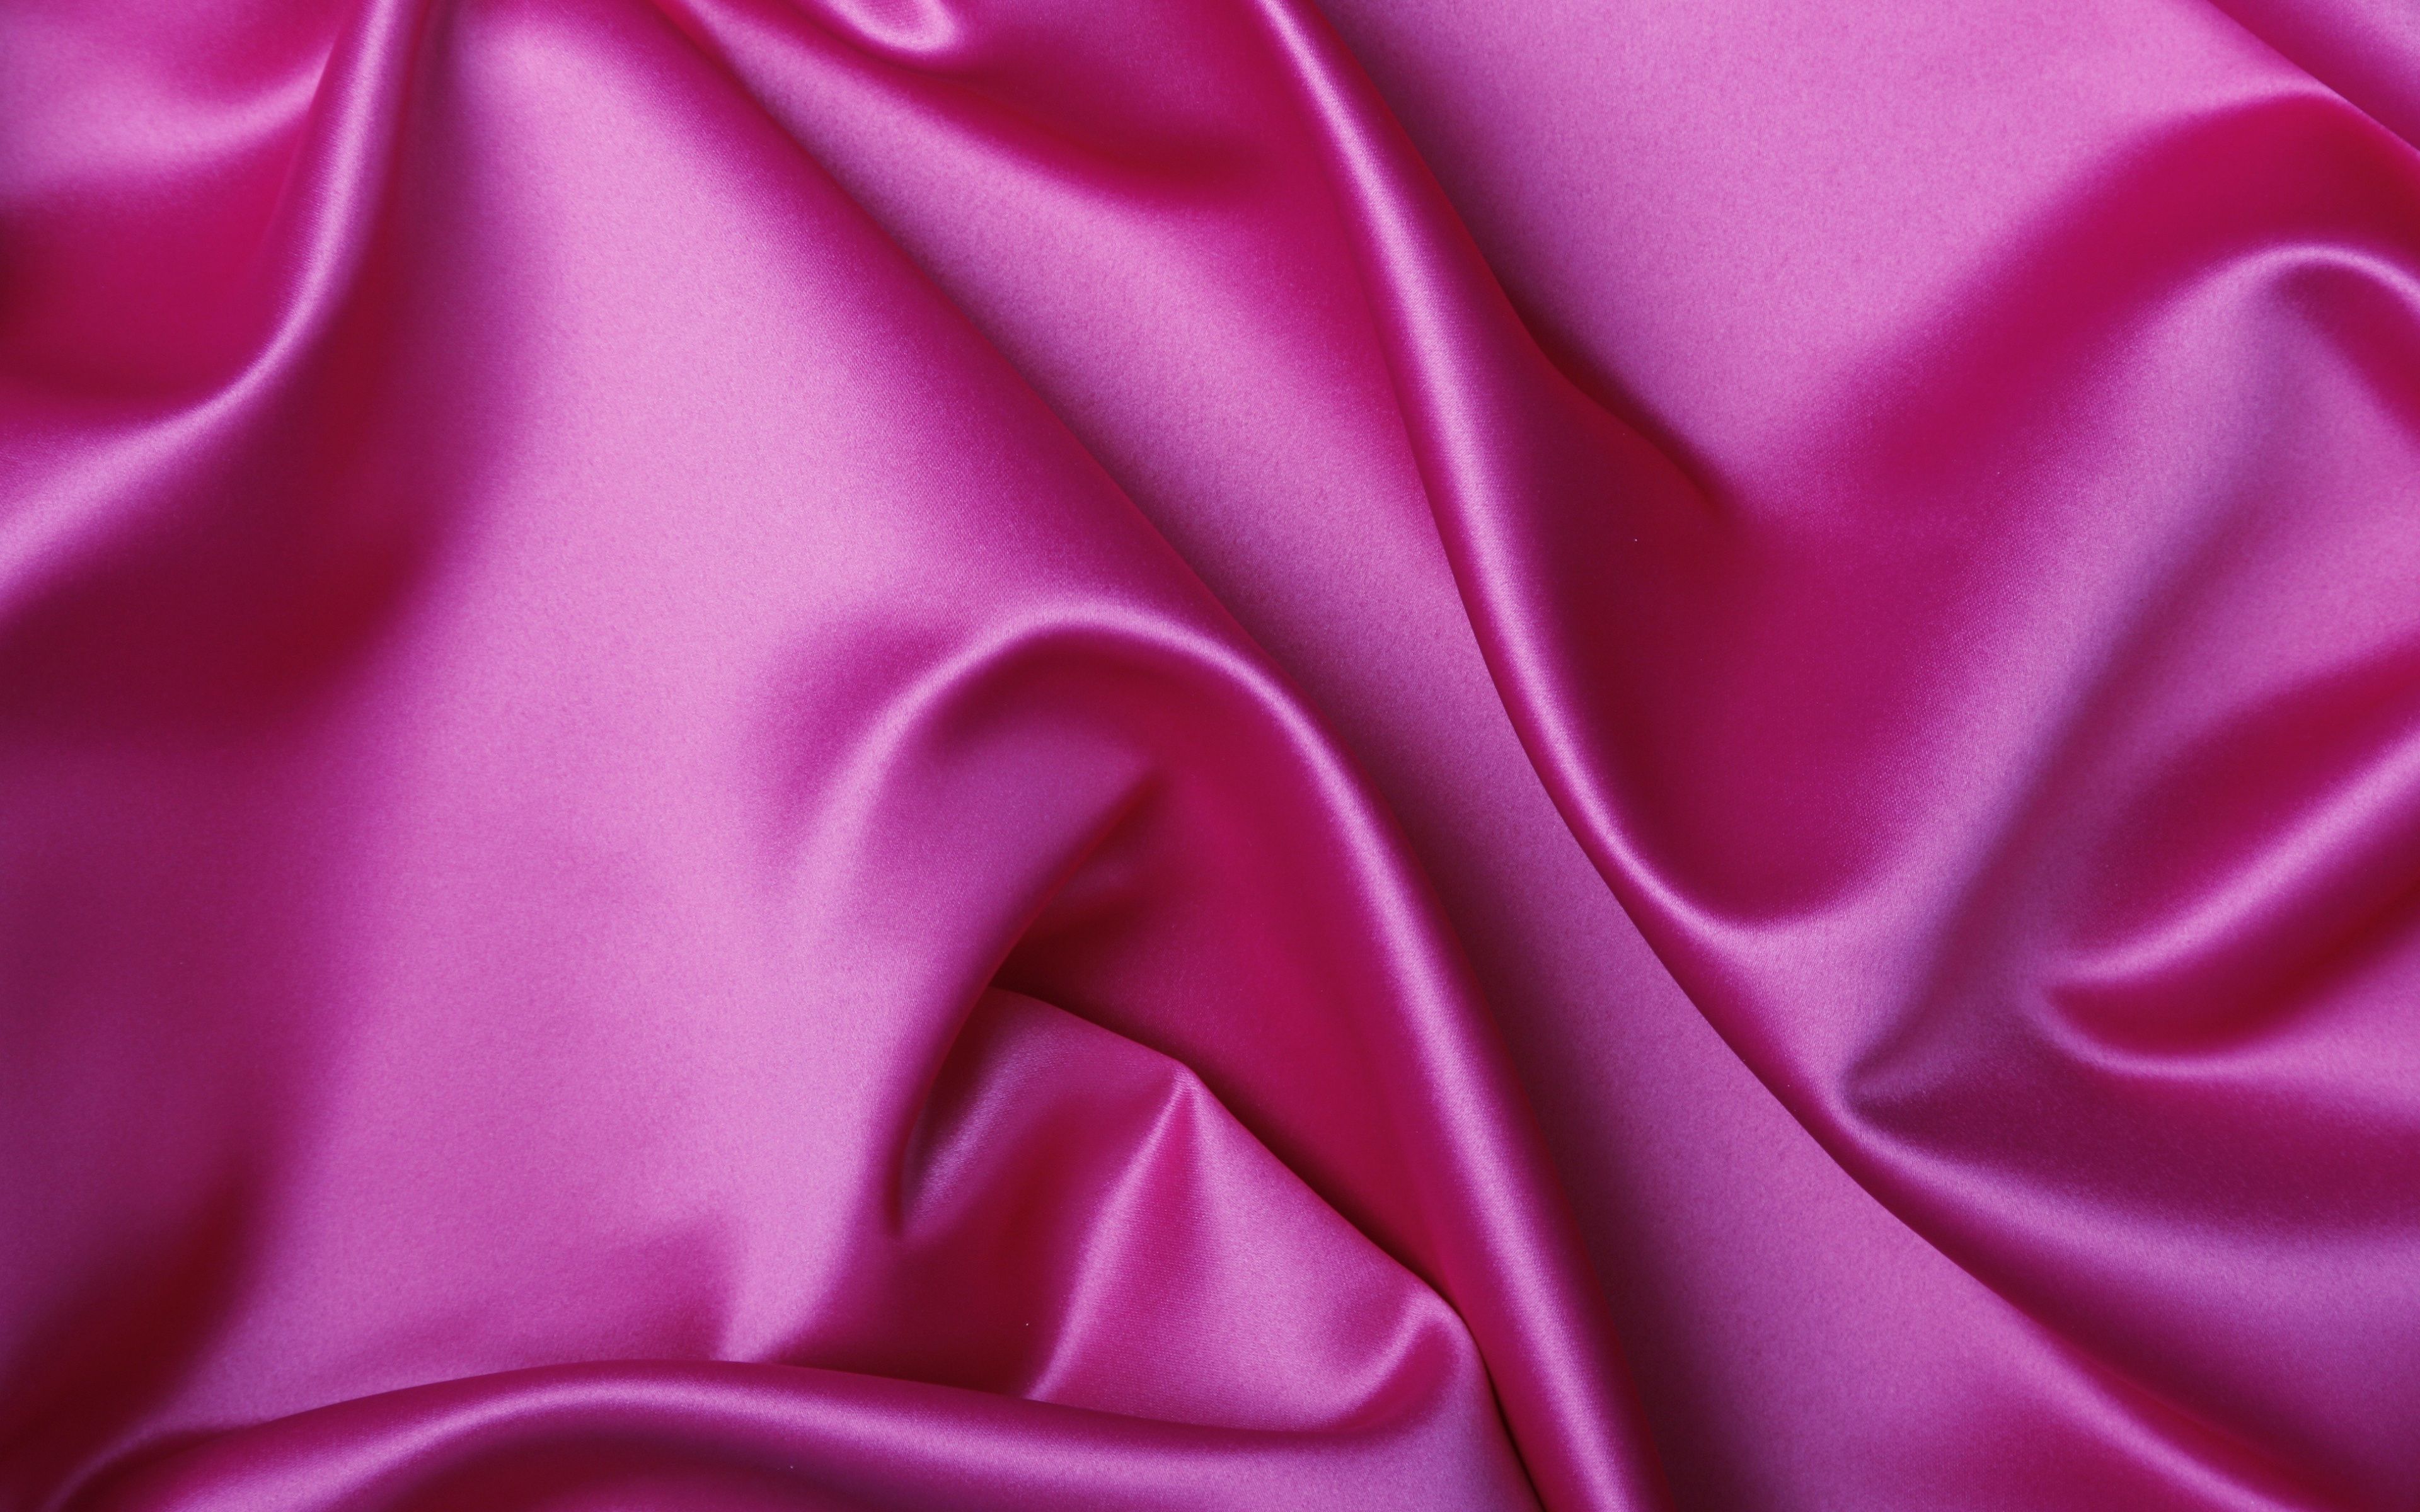 Download wallpaper pink silk, 4k, fabric texture, silk for desktop with resolution 3840x2400. High Quality HD picture wallpaper